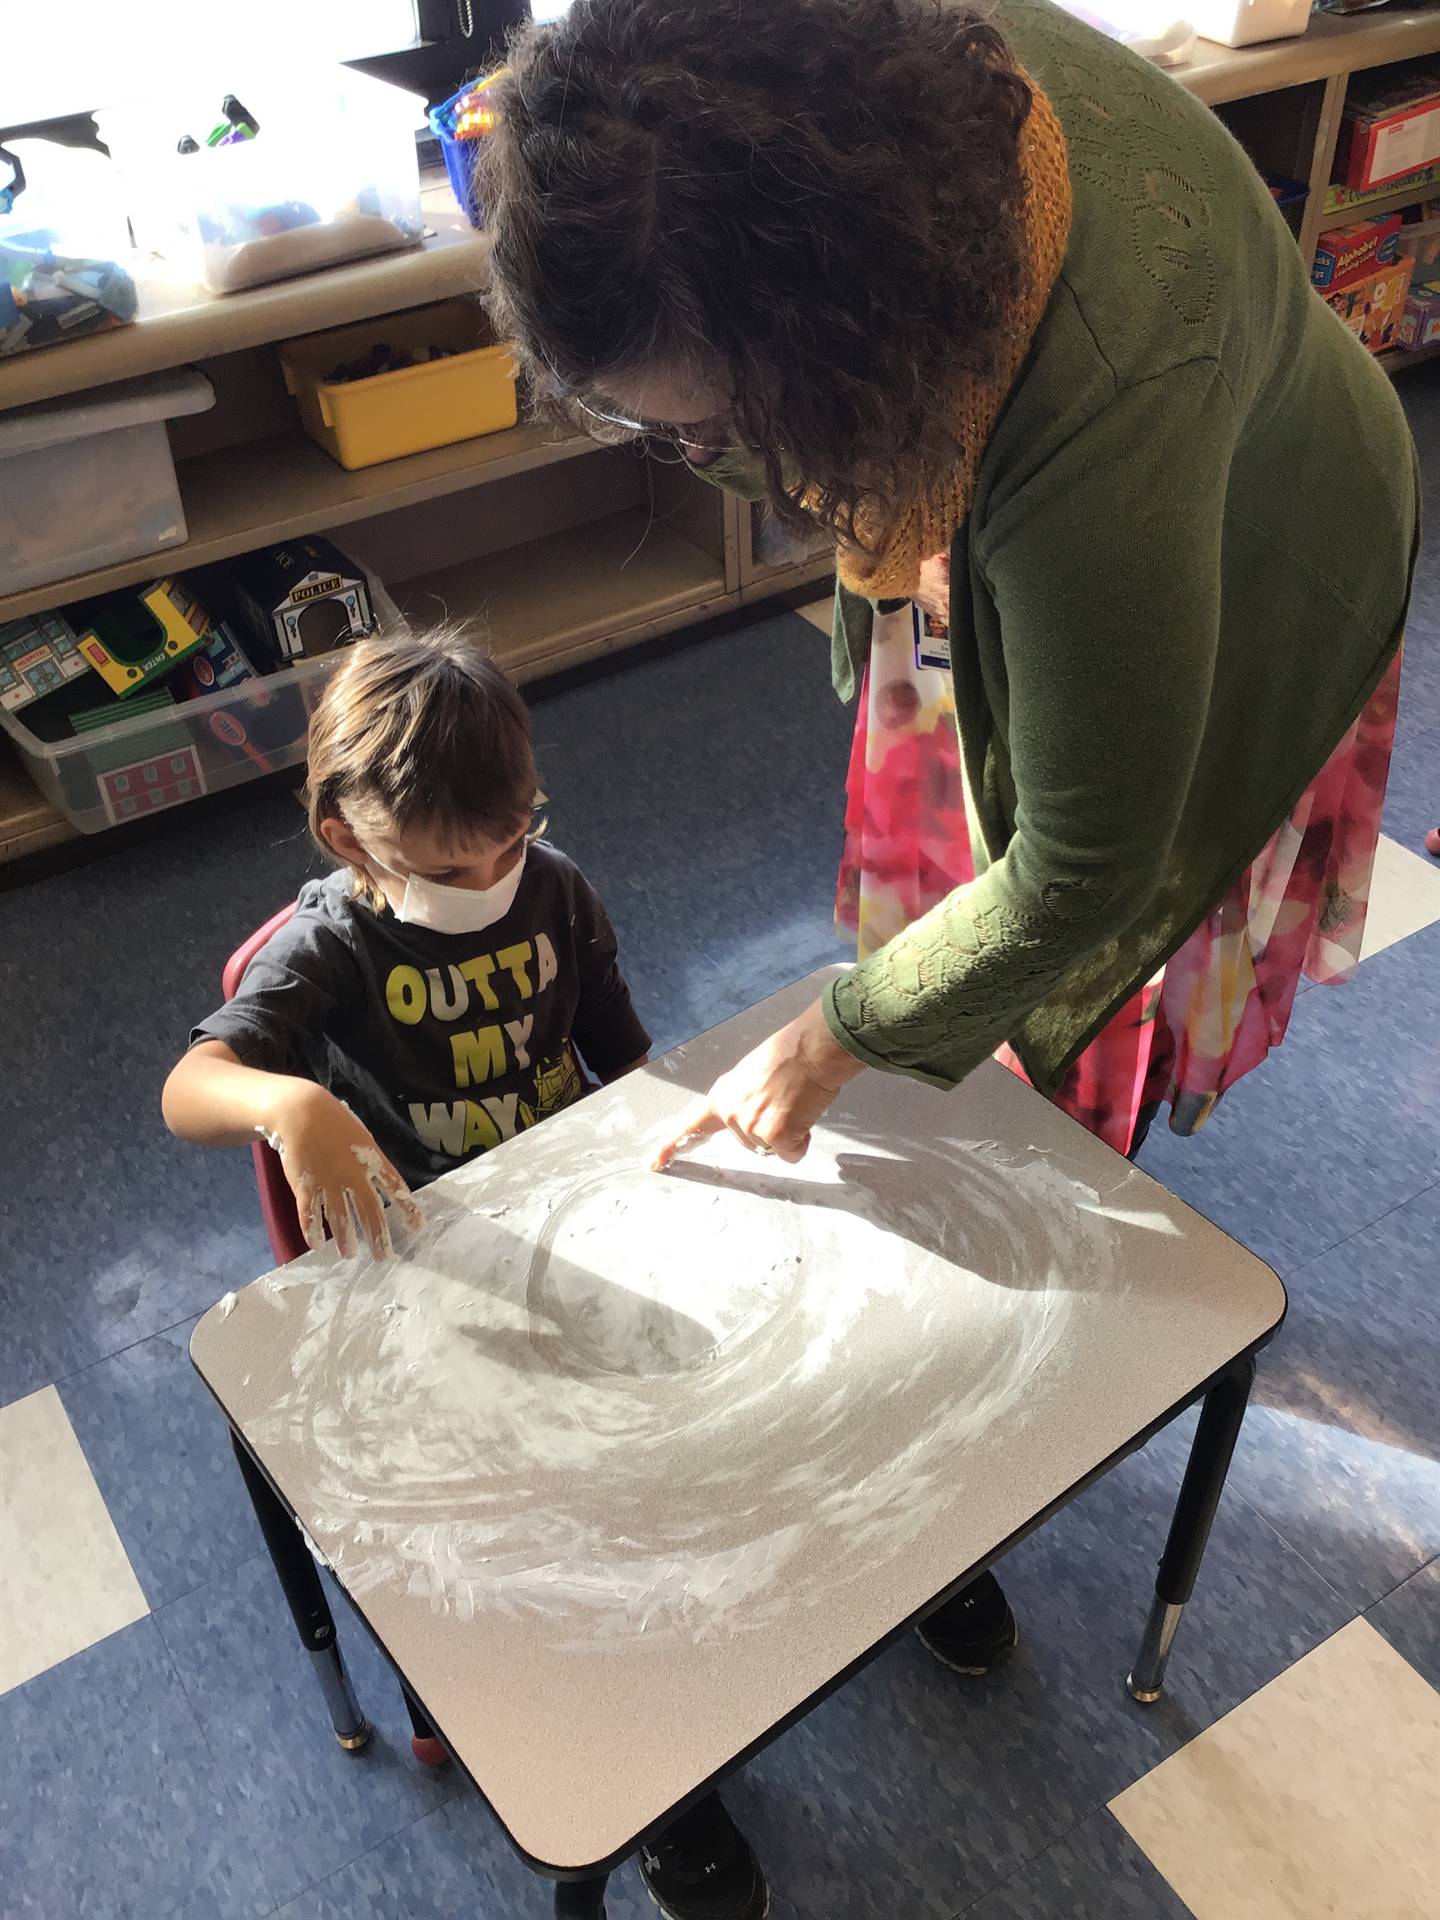 A staff member shows student how to draw a feeling.